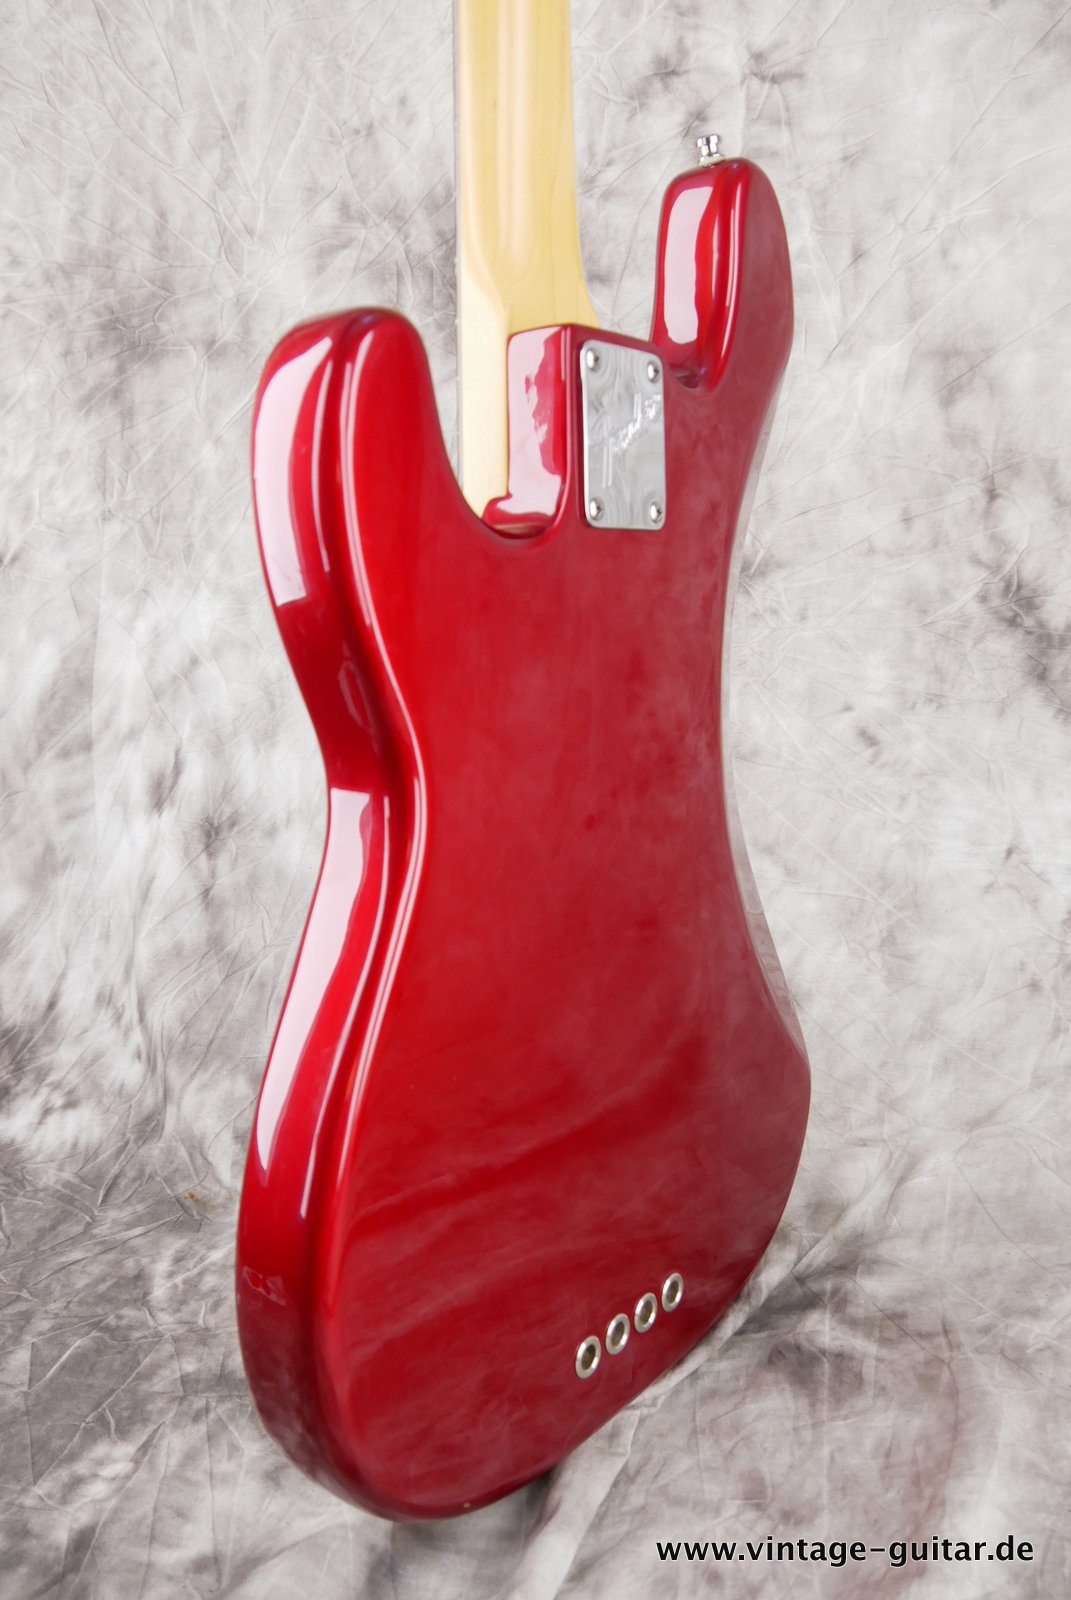 Fender-Precision-Bass-1994-candy-apple-red-007.JPG